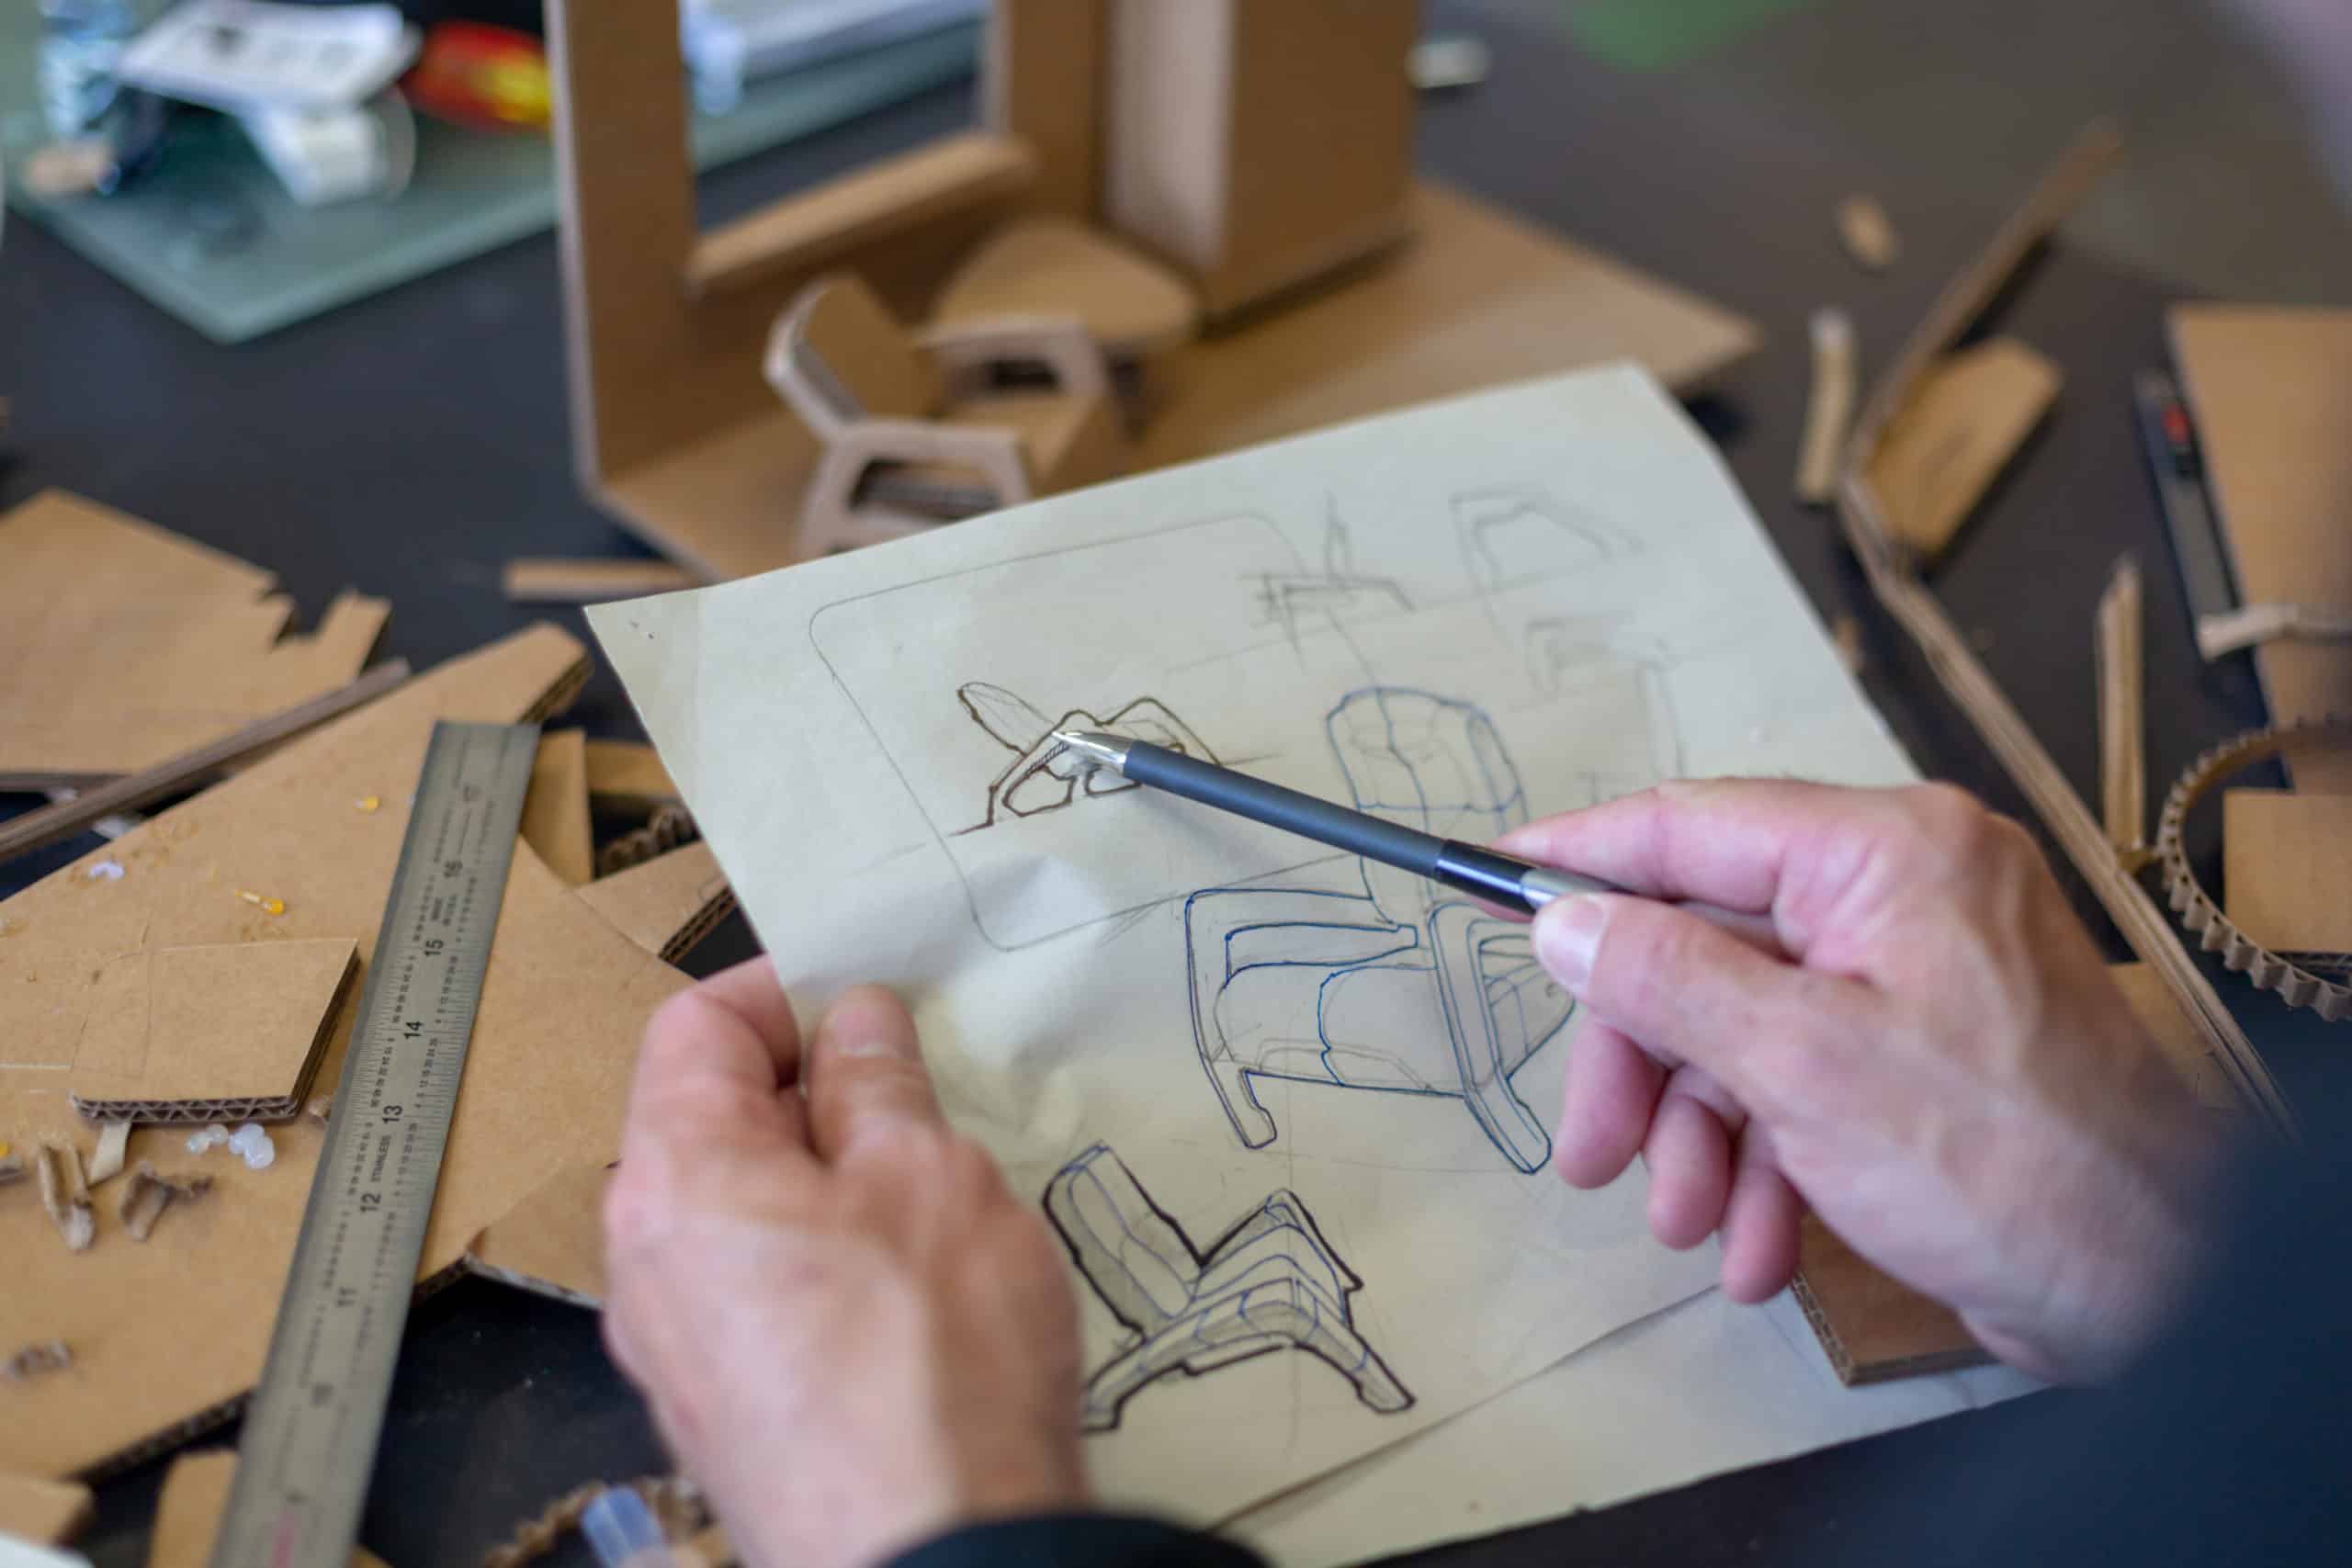 Industrial designer doing rapid prototypingpointing to a sketch of furniture